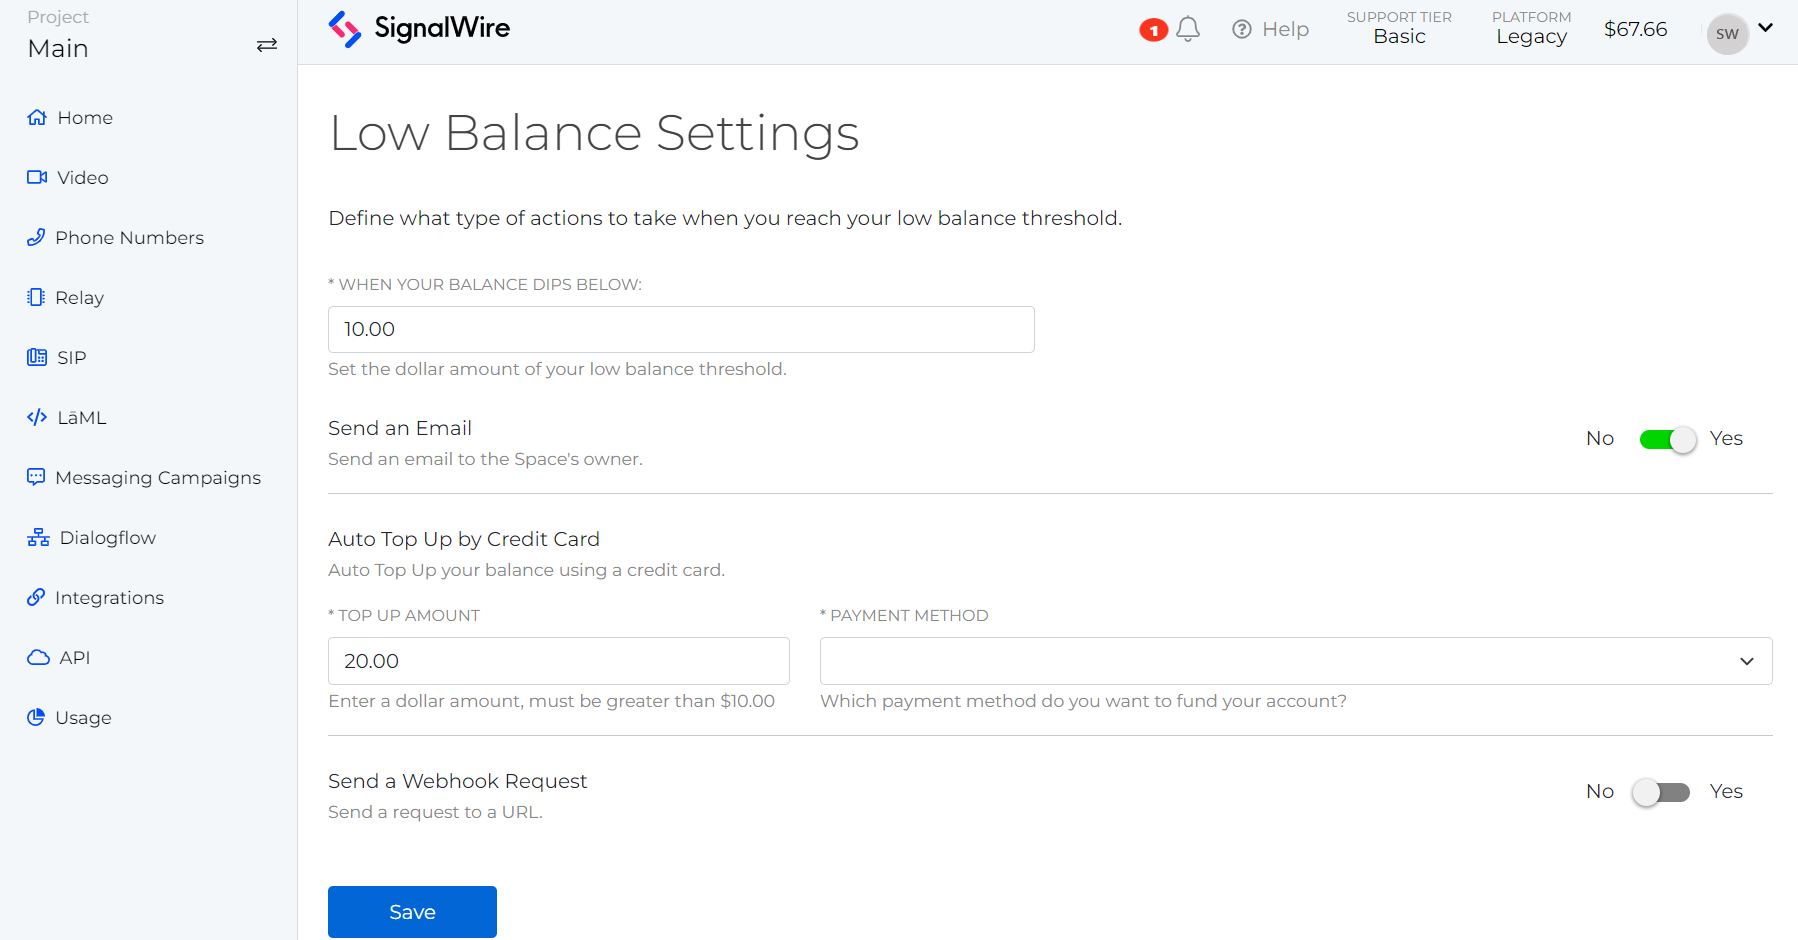 Image showing the Low Balance Settings page on the SignalWire Dashboard.